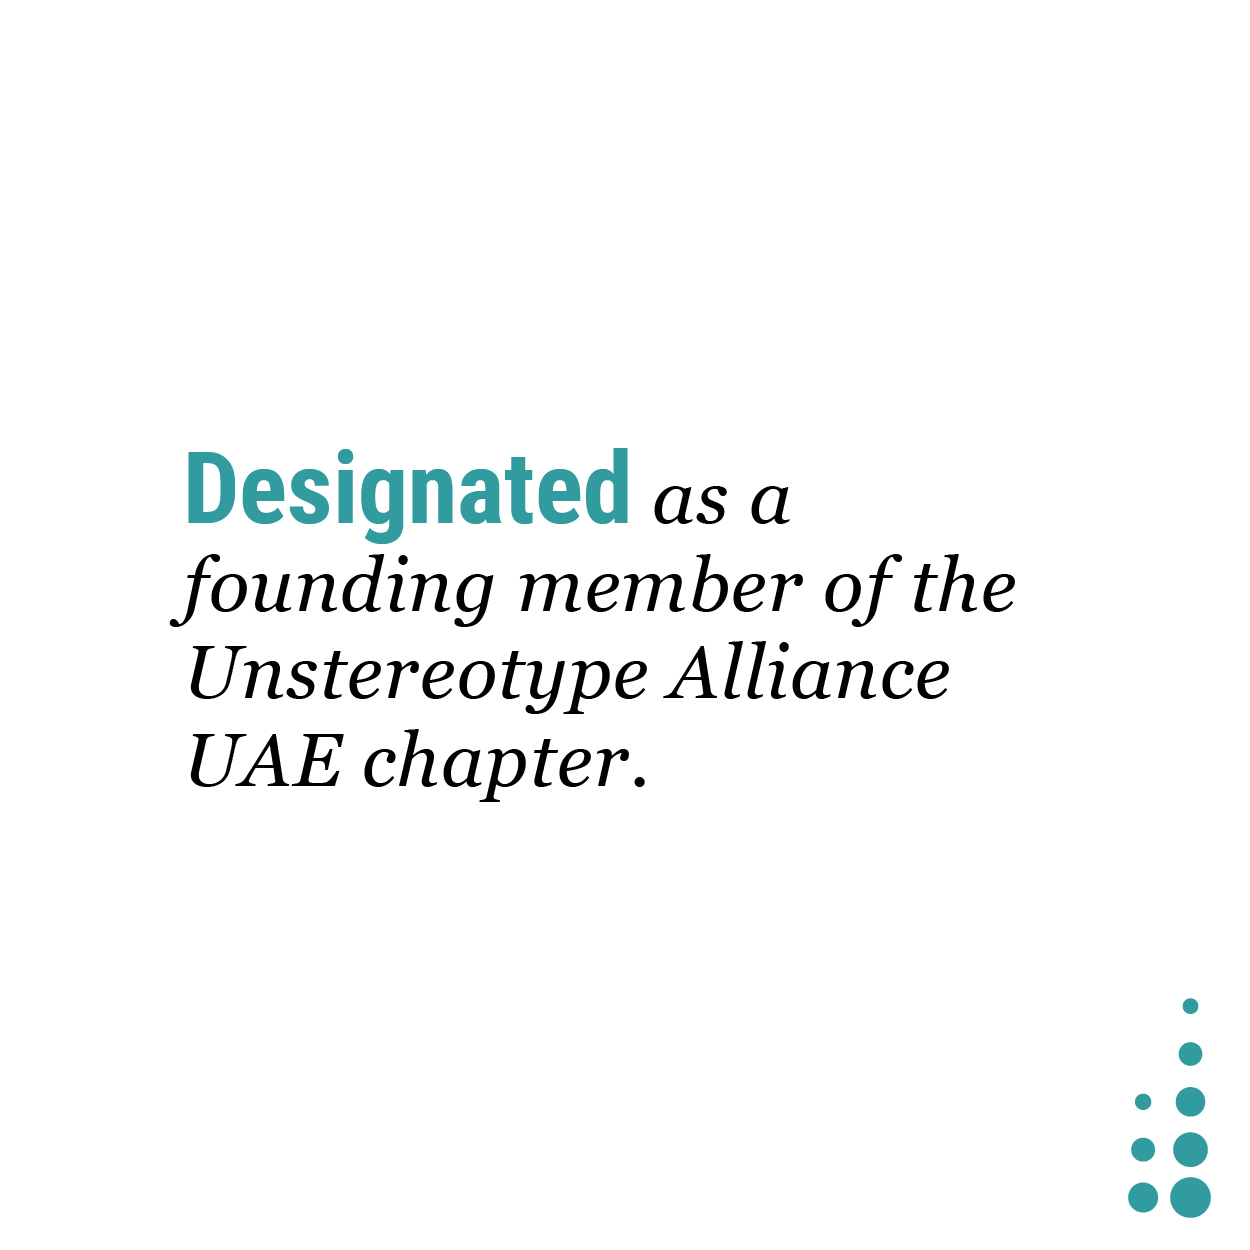 Designated as a founding member of the Unstereotype Alliance Committee UAE chapter.